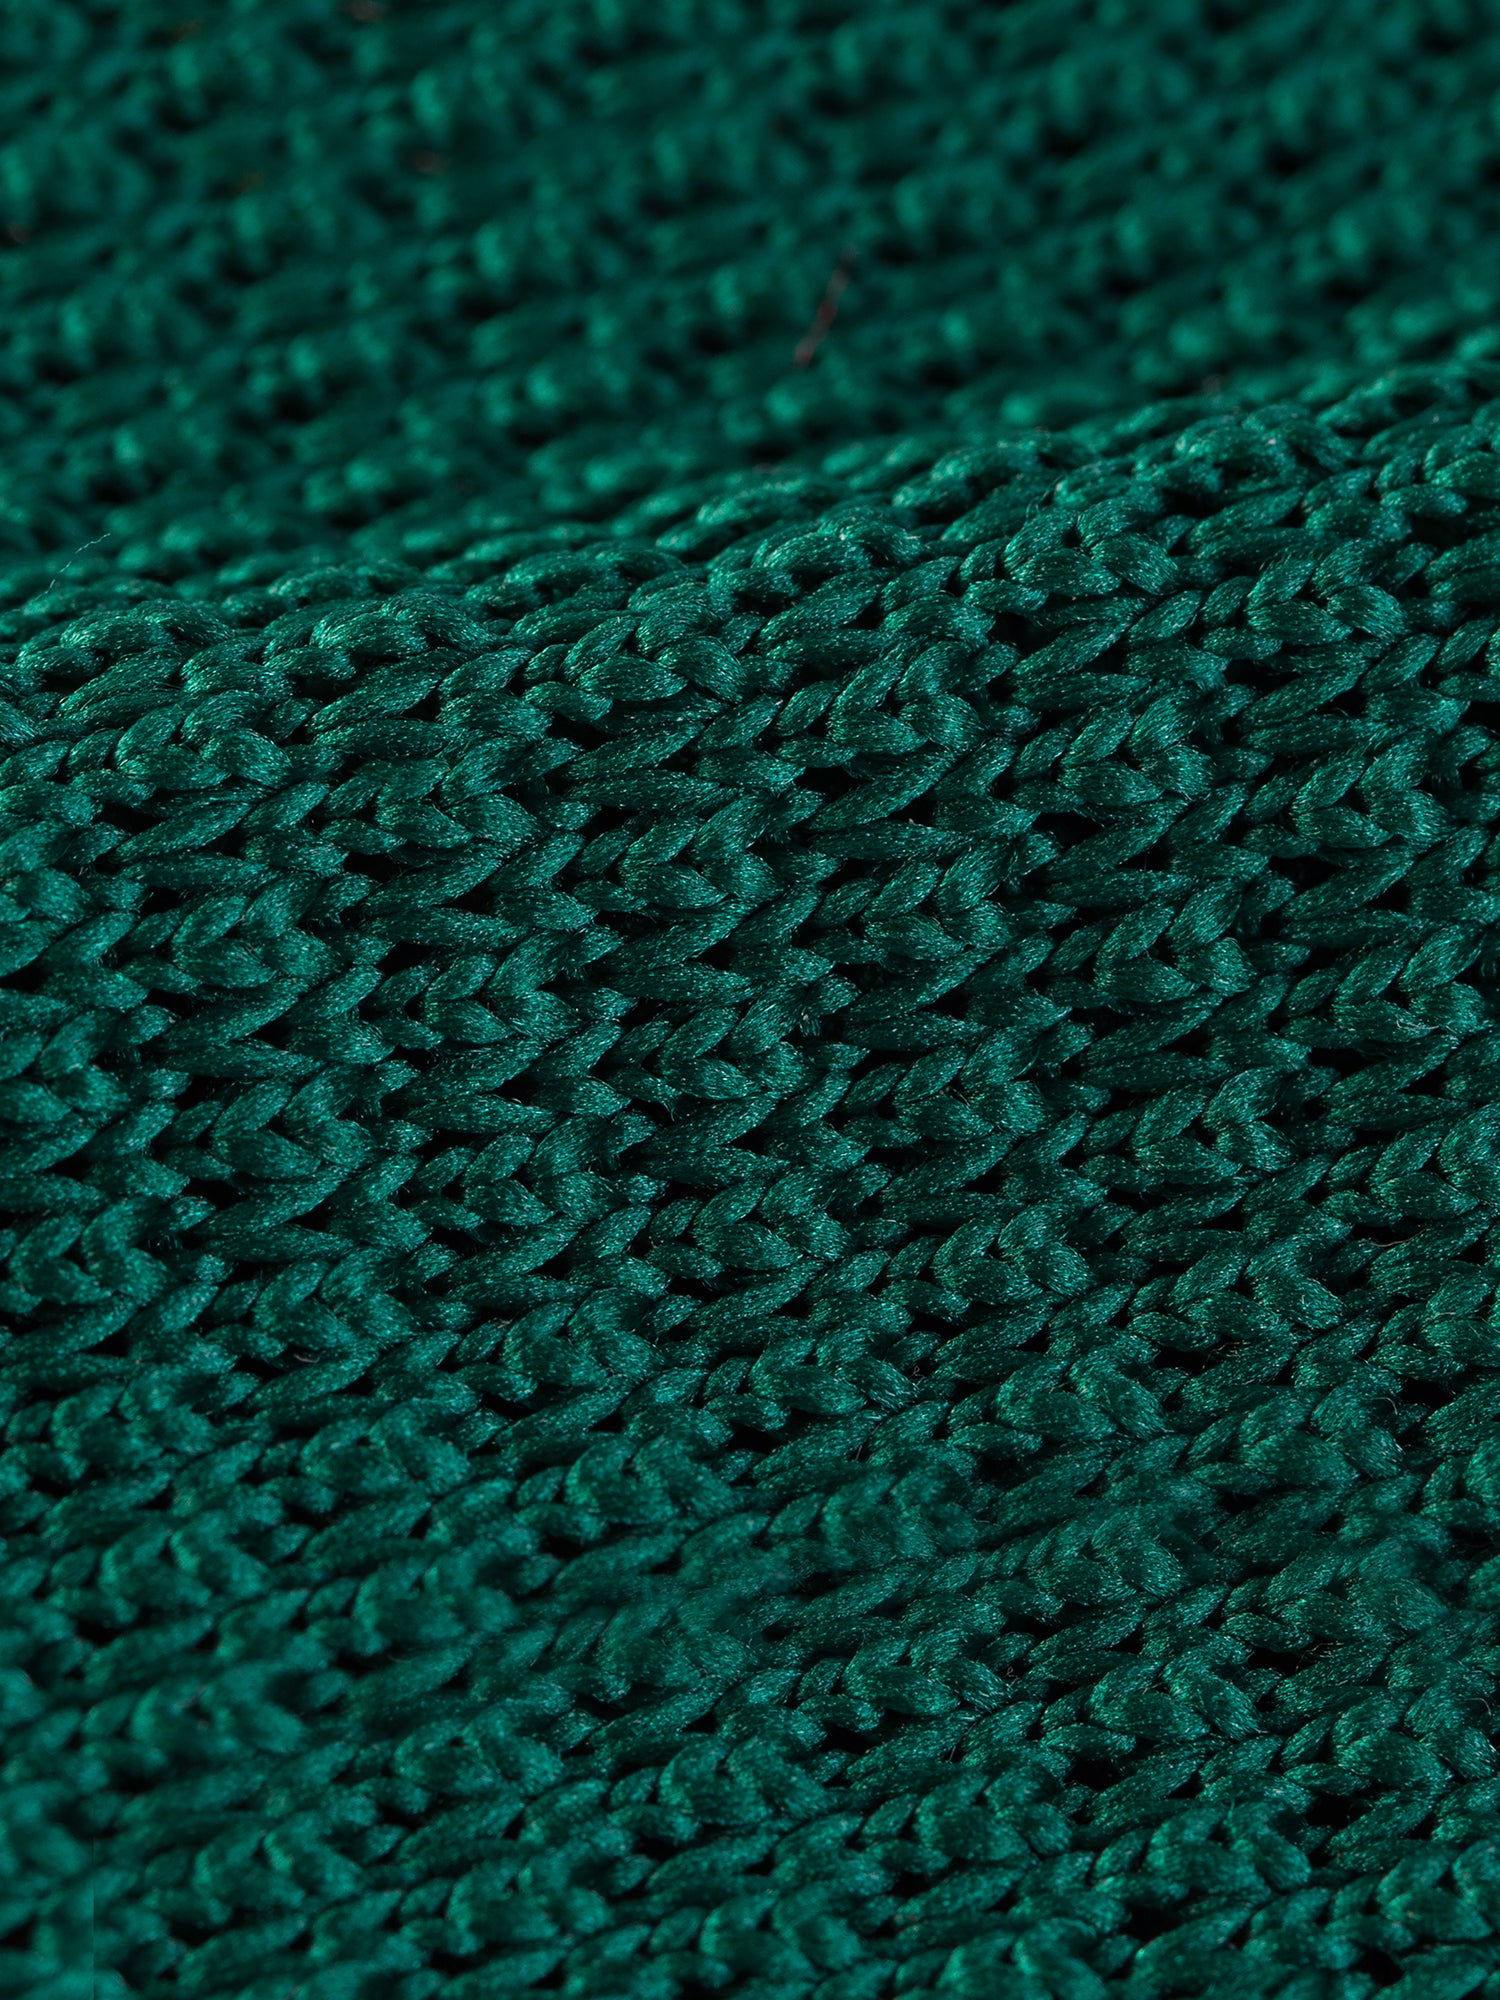 Green Knitted Tie 6cm